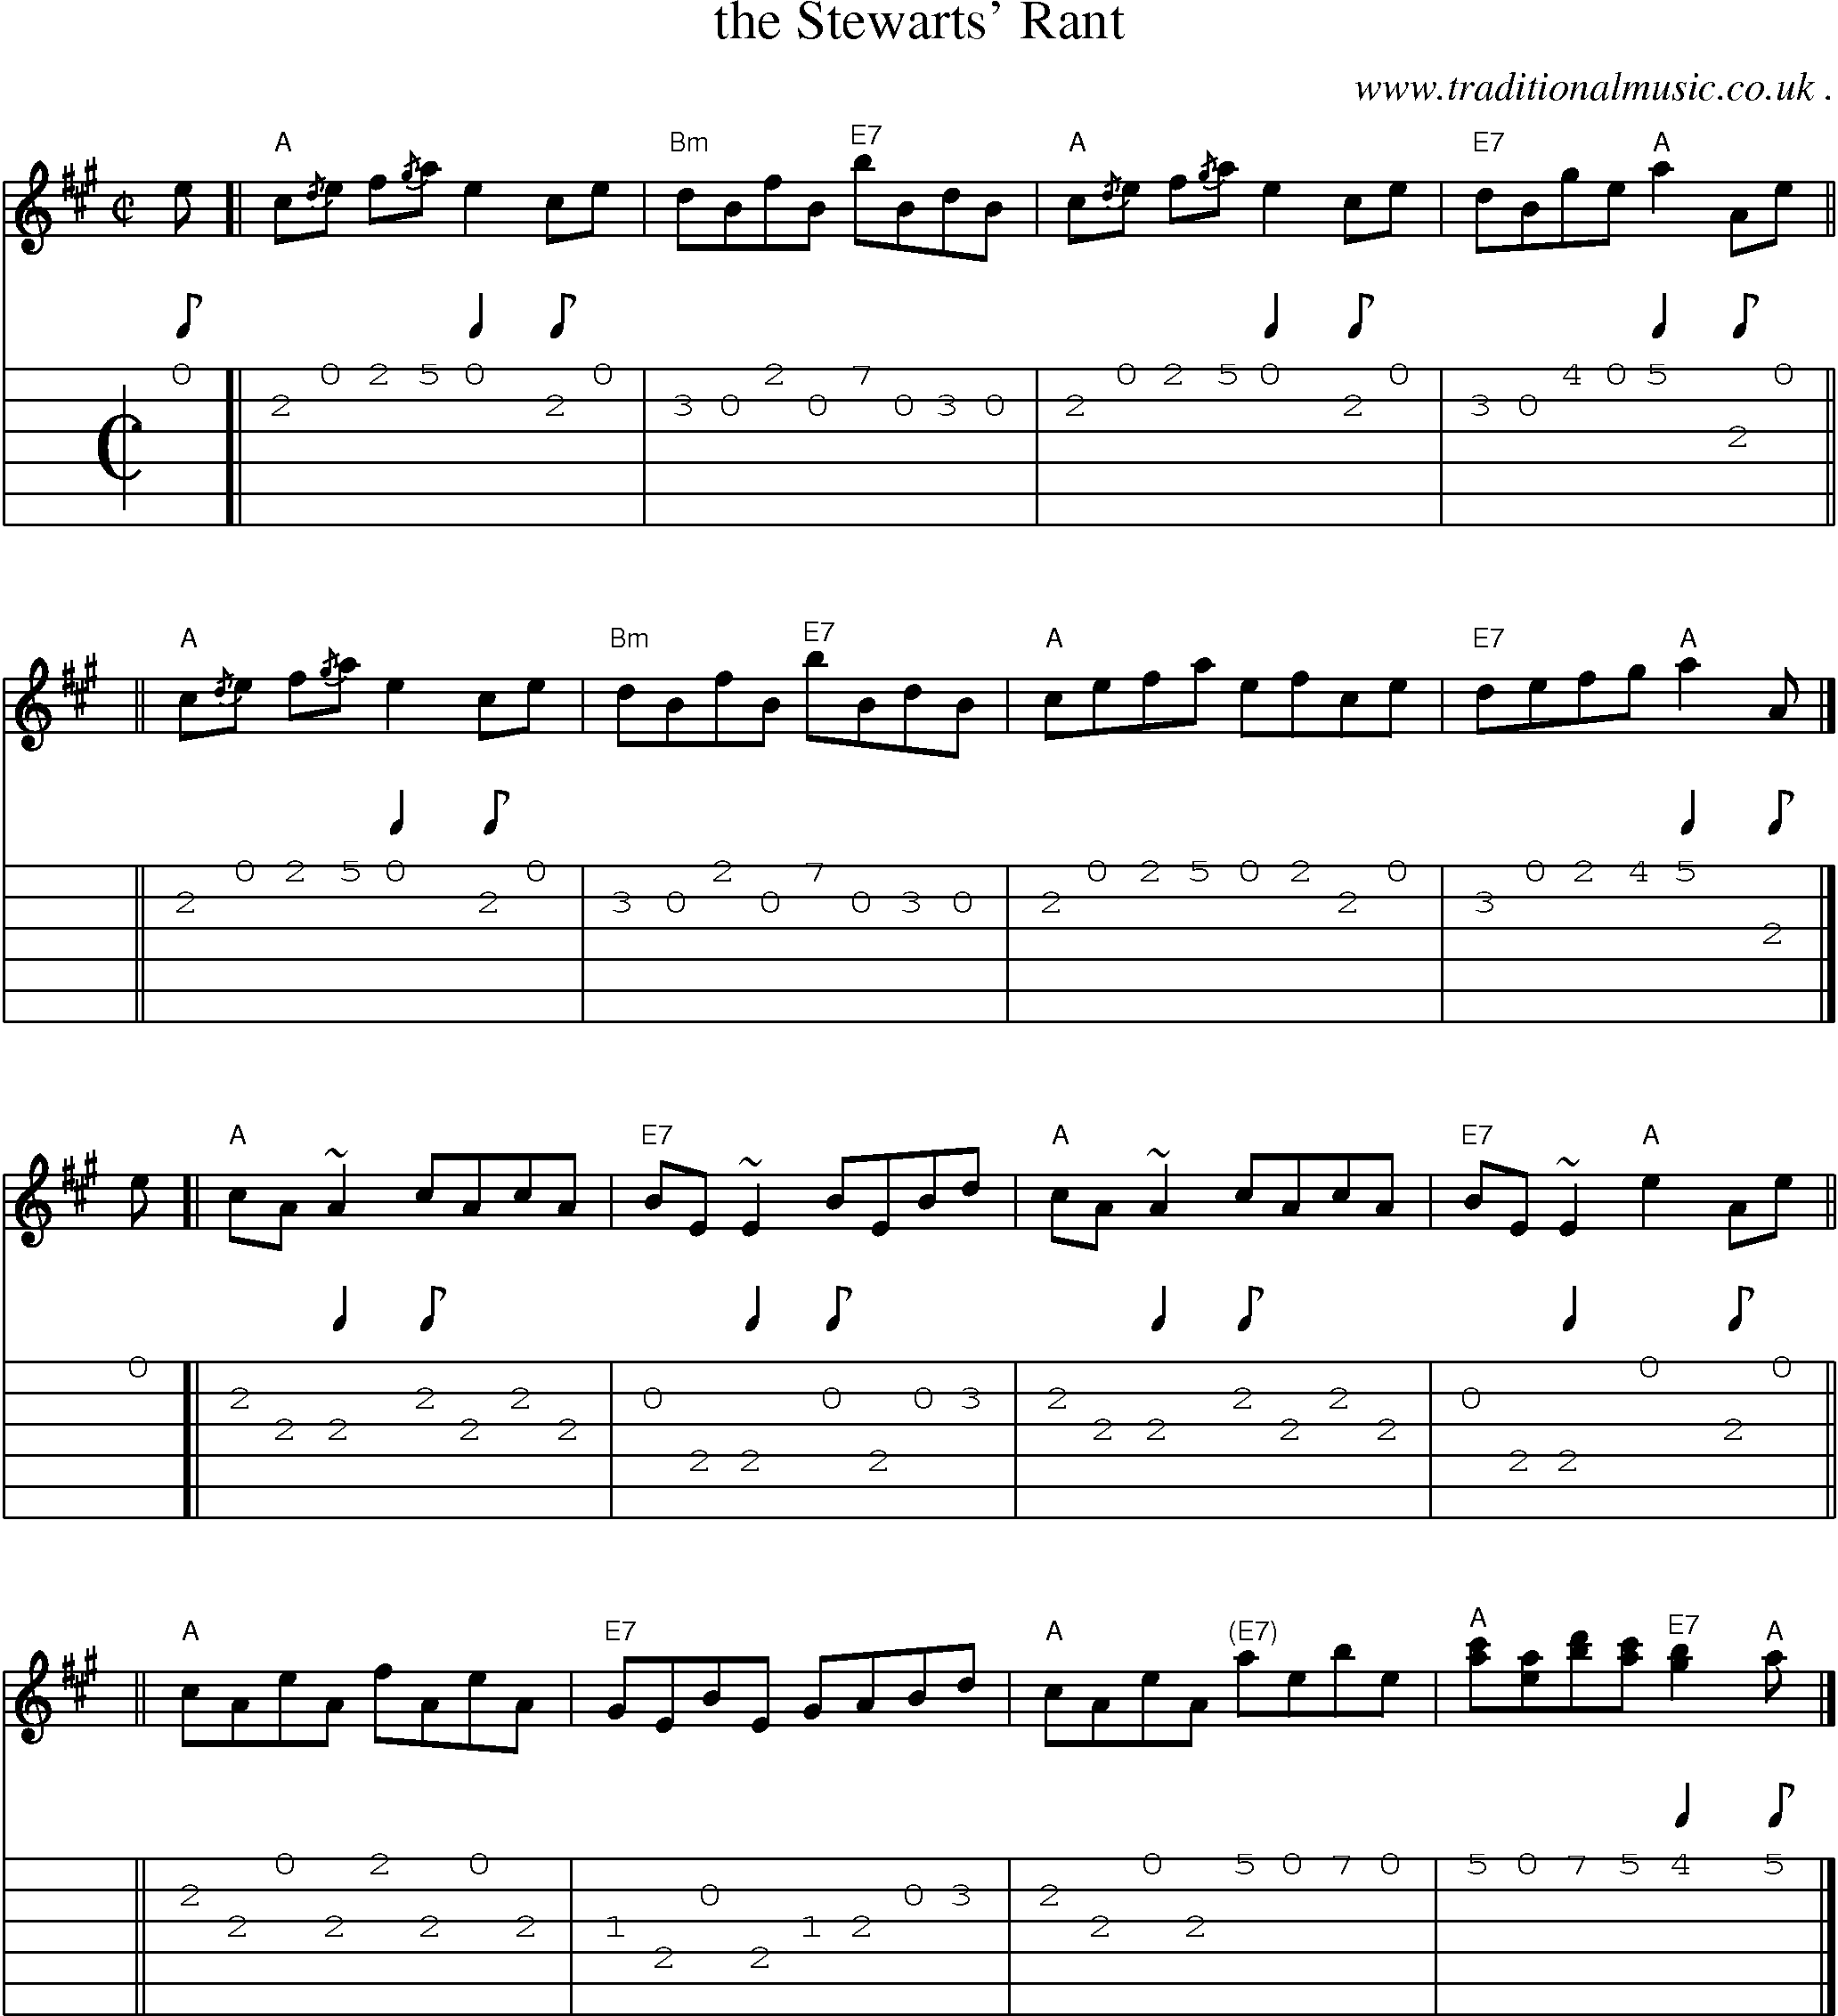 Sheet-music  score, Chords and Guitar Tabs for The Stewarts Rant